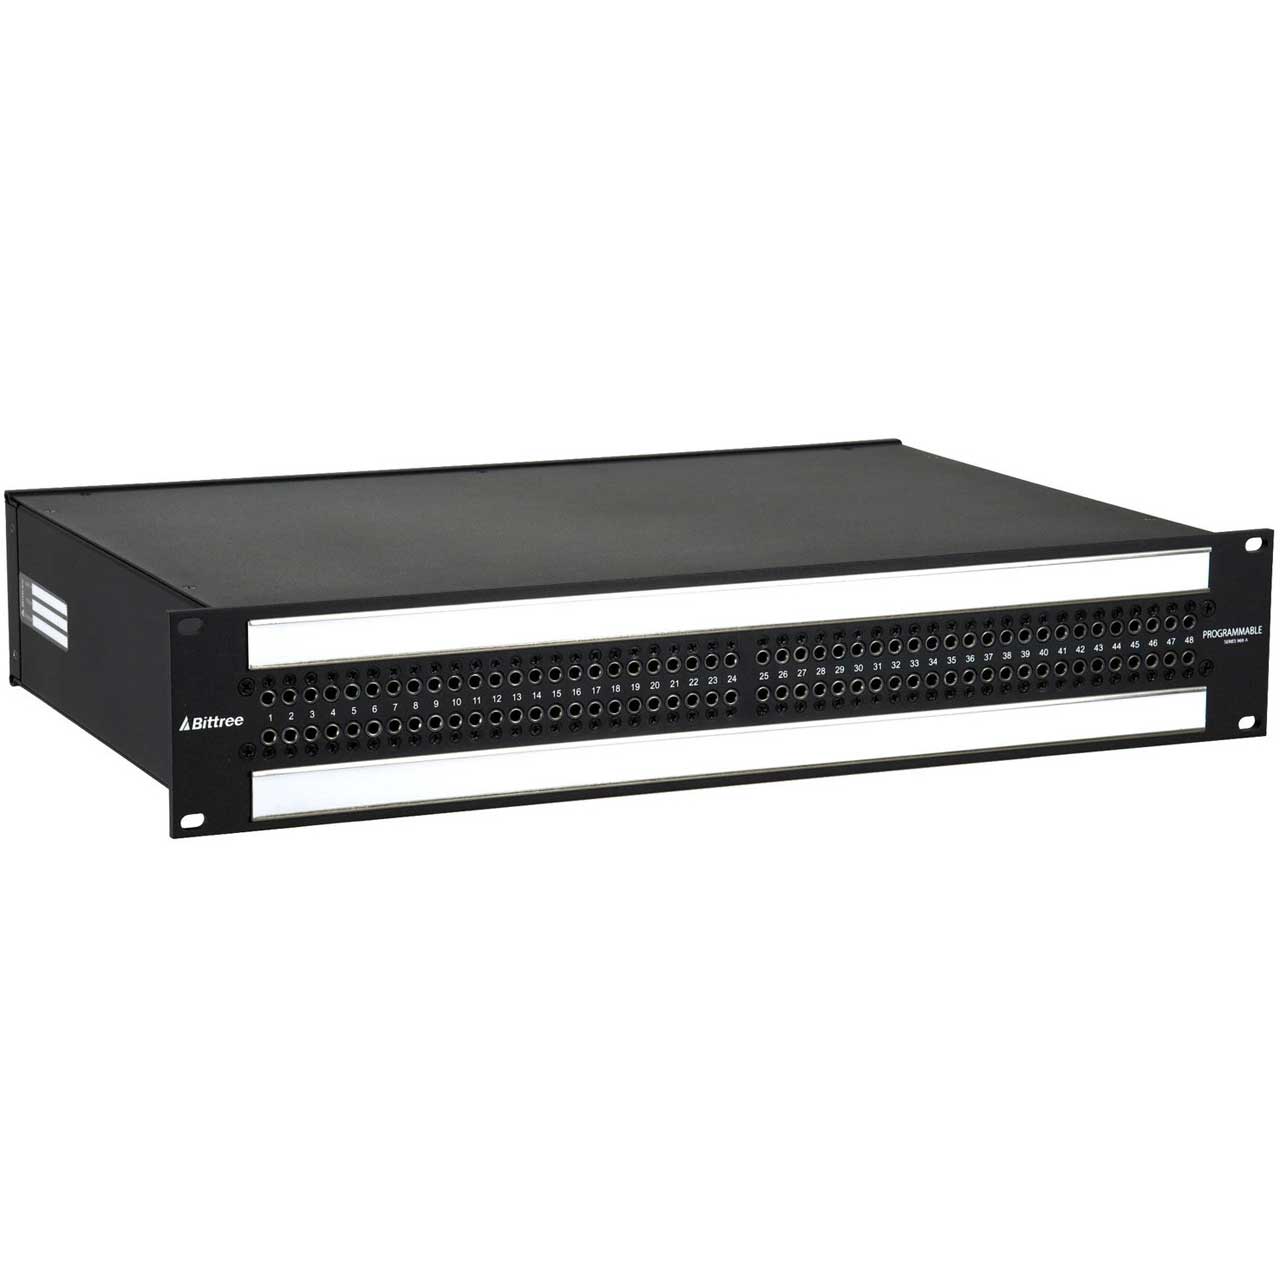 Bittree B96DC-HNAIT/E3 M2OU7B (969A554) 2 Ru Black 2x48 Mono Spaced In A 7-Inch Chassis Bantam Patchbay